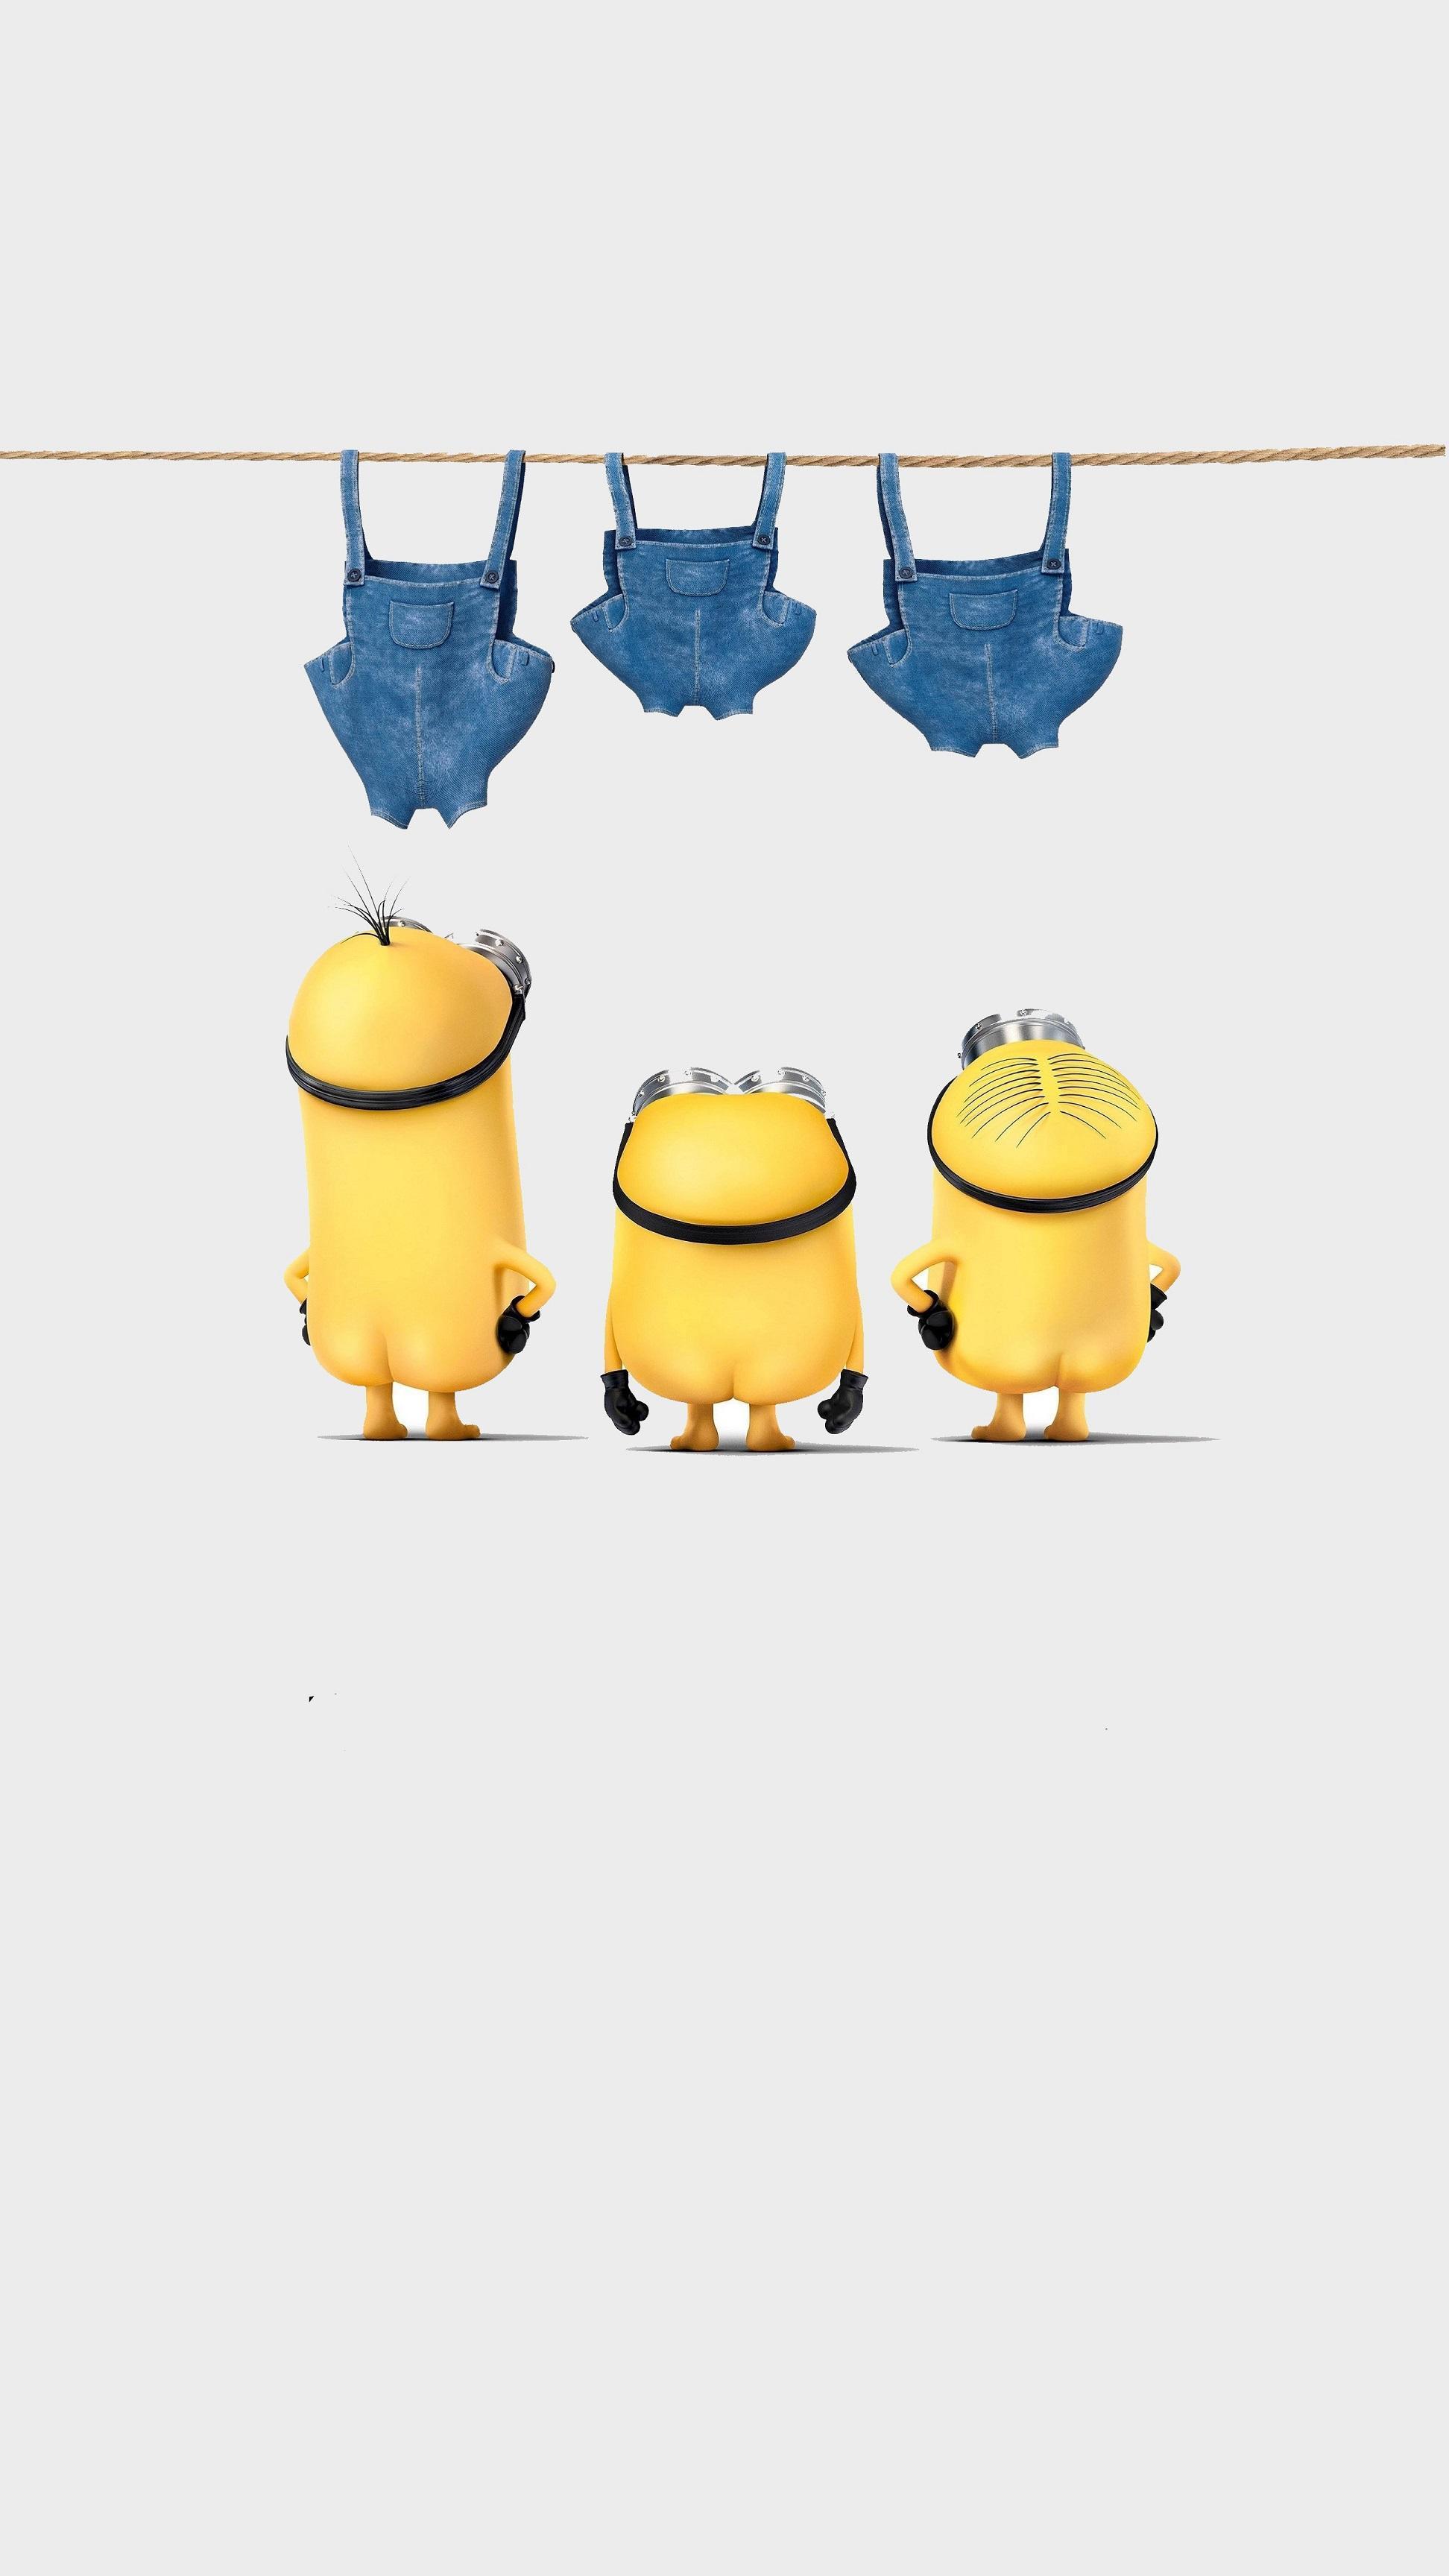 Minion HD Wallpaper for Android